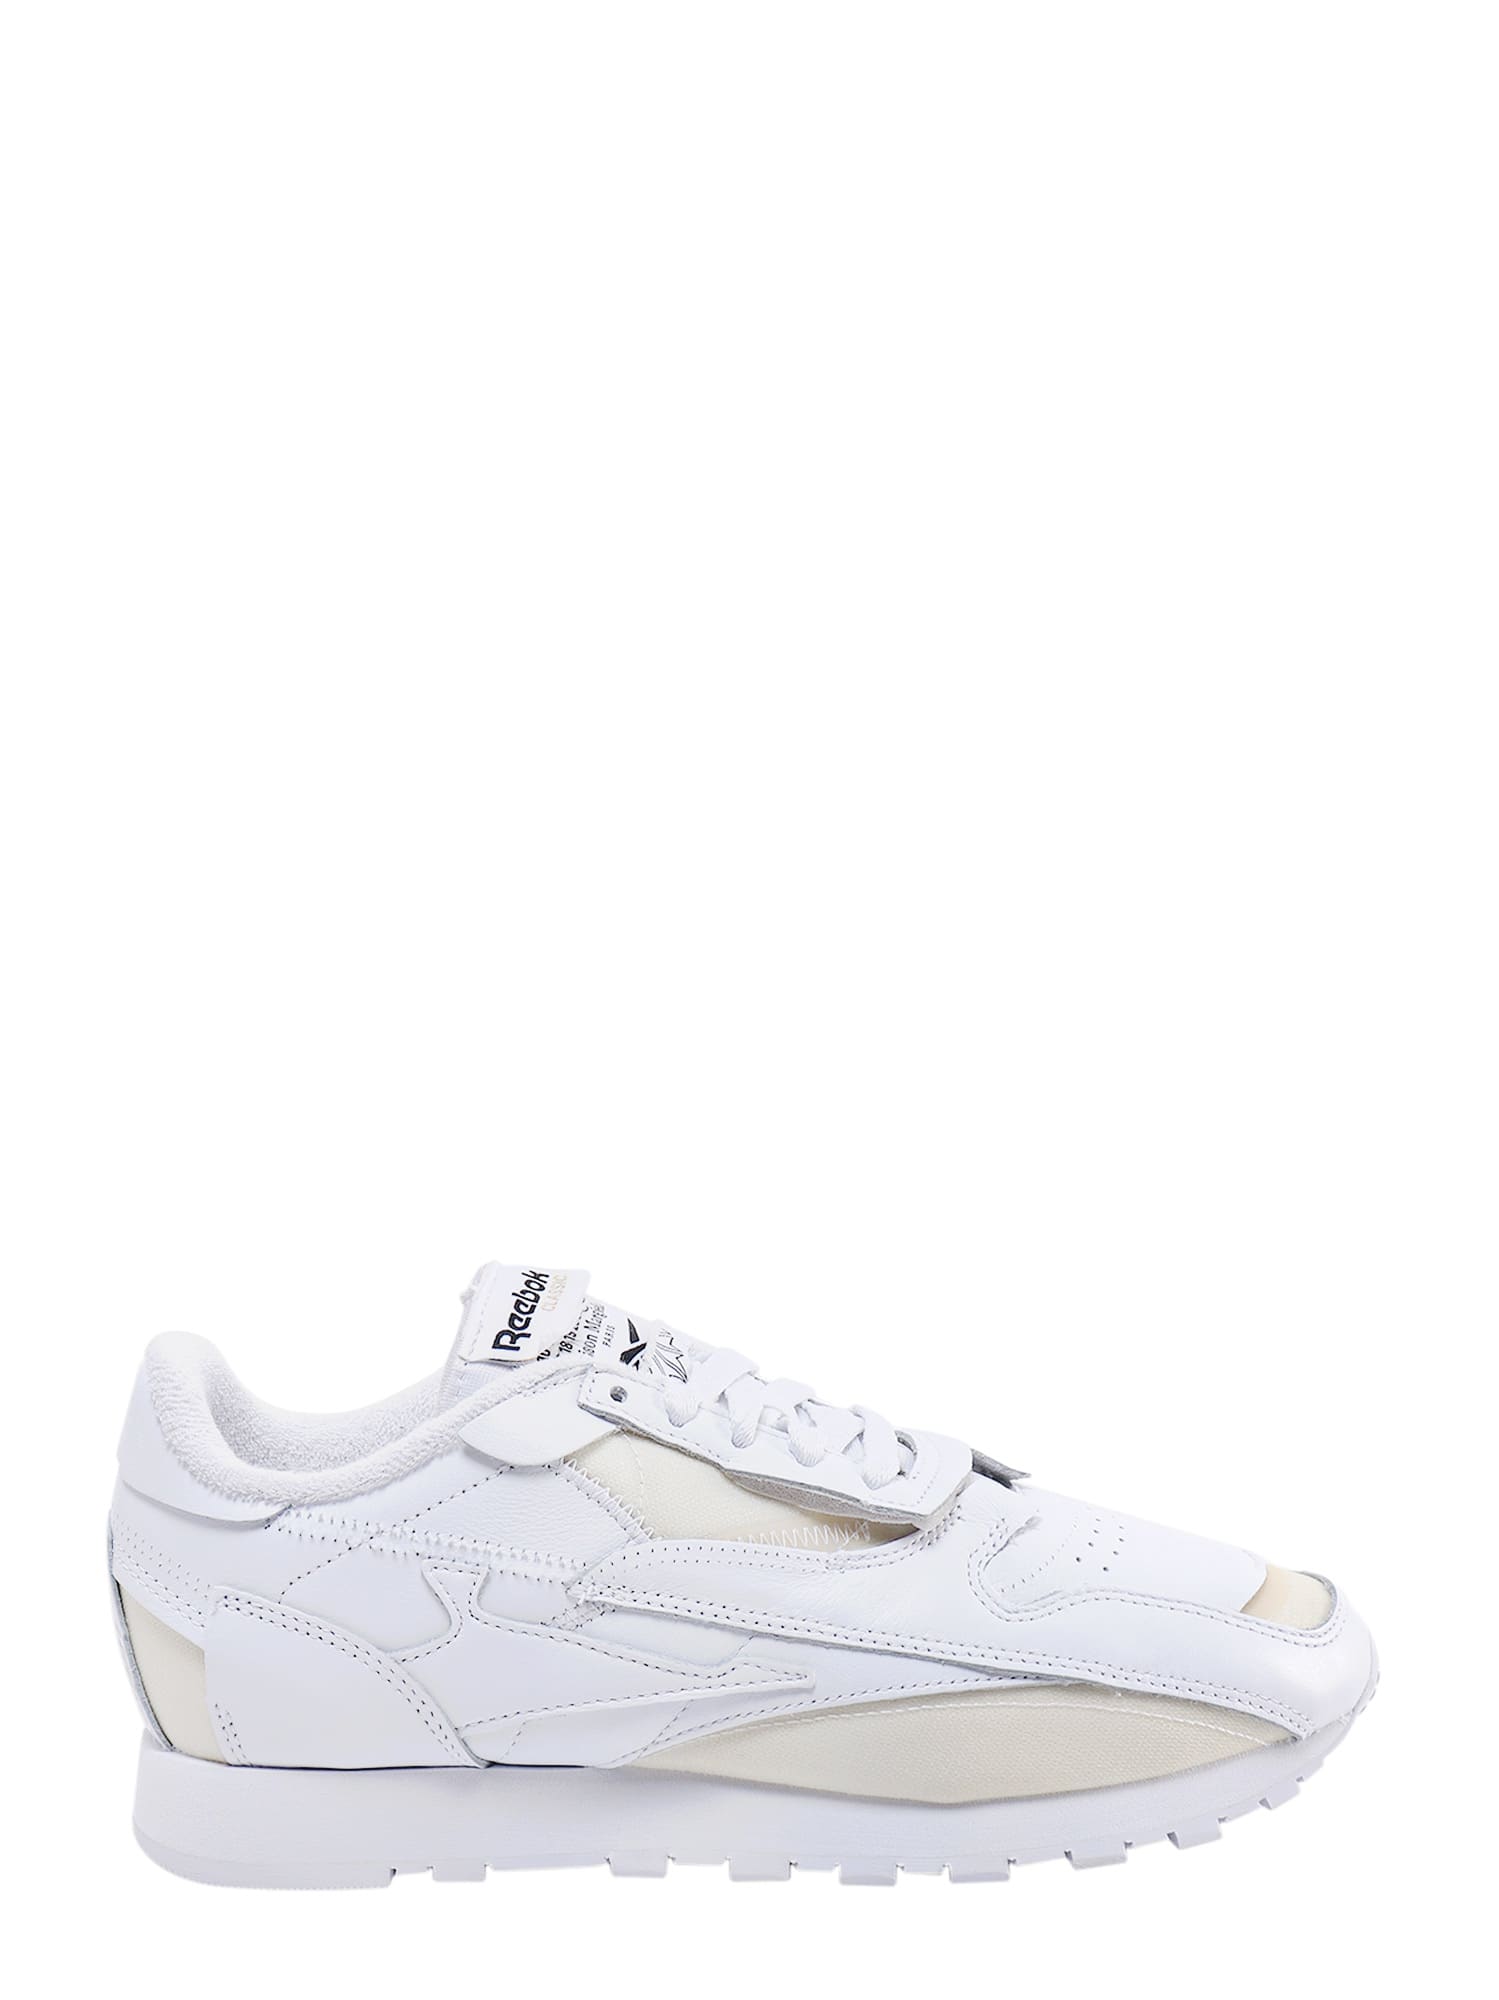 Maison Margiela Project 0 Cl Memory Of V2 Sneakers